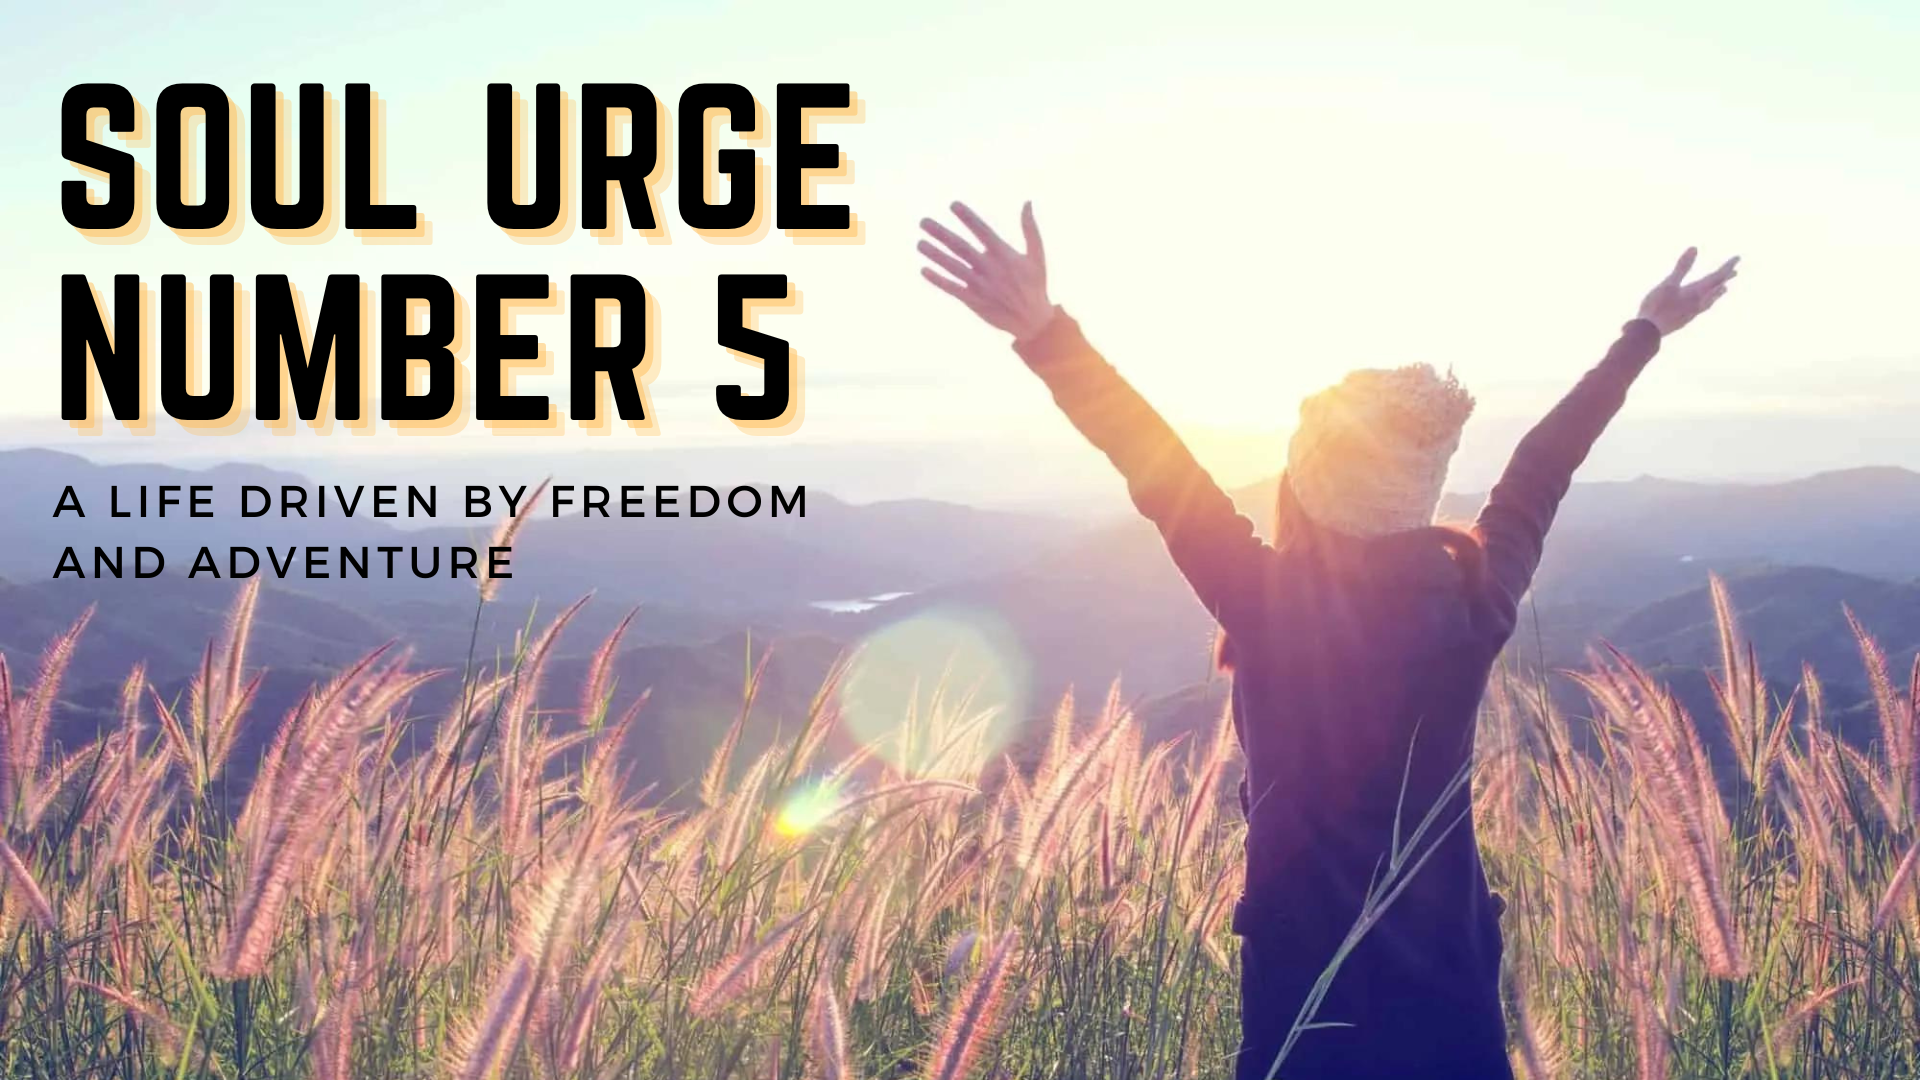 Soul Urge Number 5 - A Life Driven By Freedom And Adventure